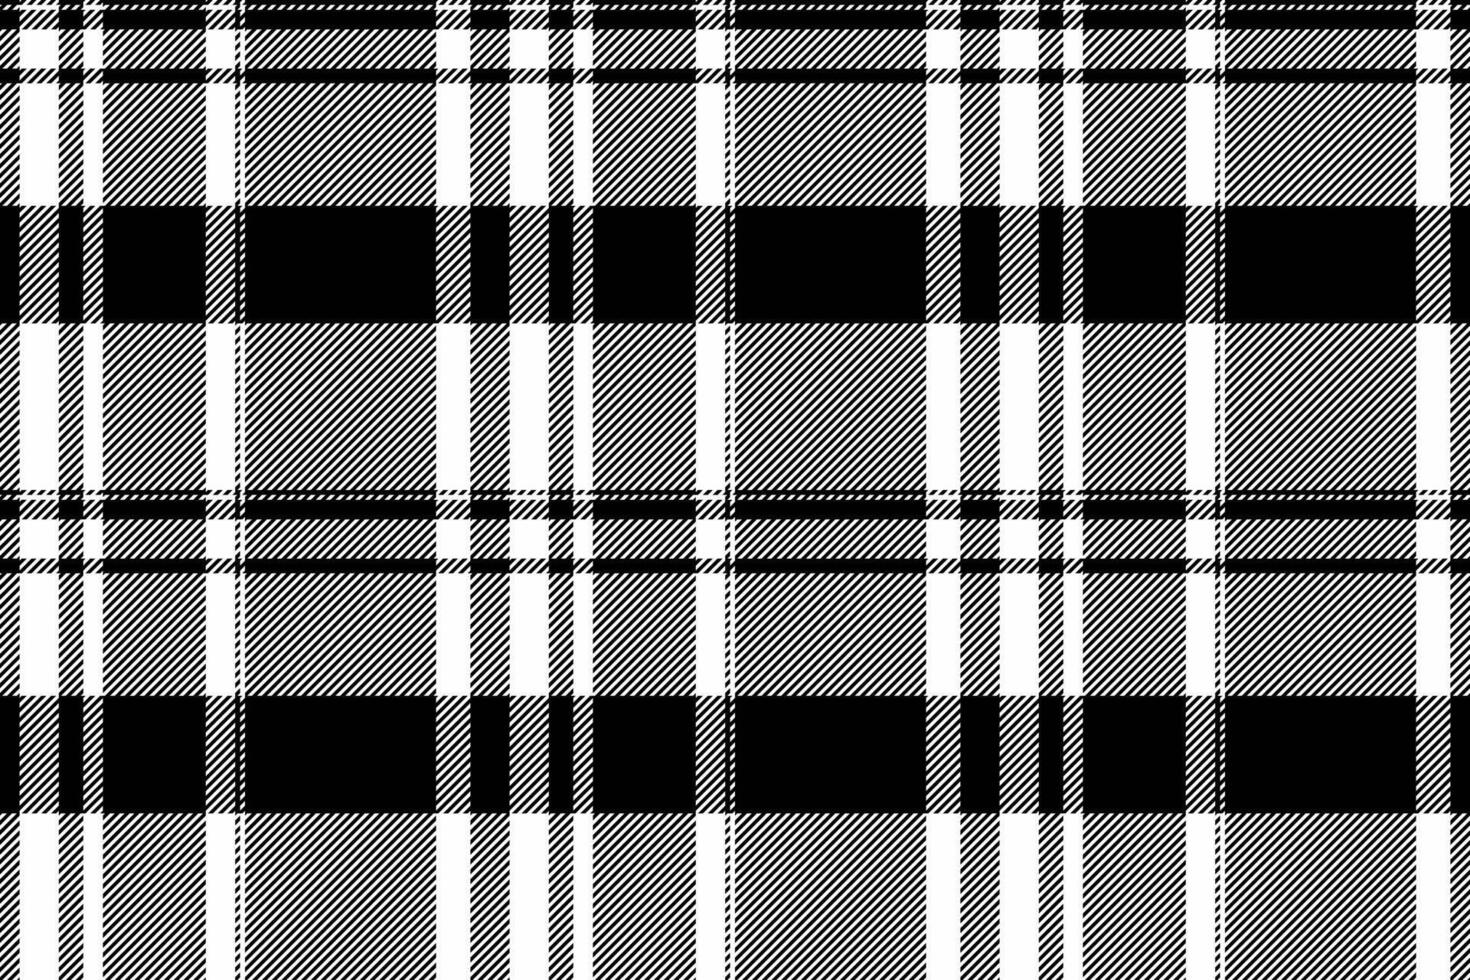 Woven textile plaid background, french tartan vector fabric. Pillow seamless check pattern texture in black and white colors.